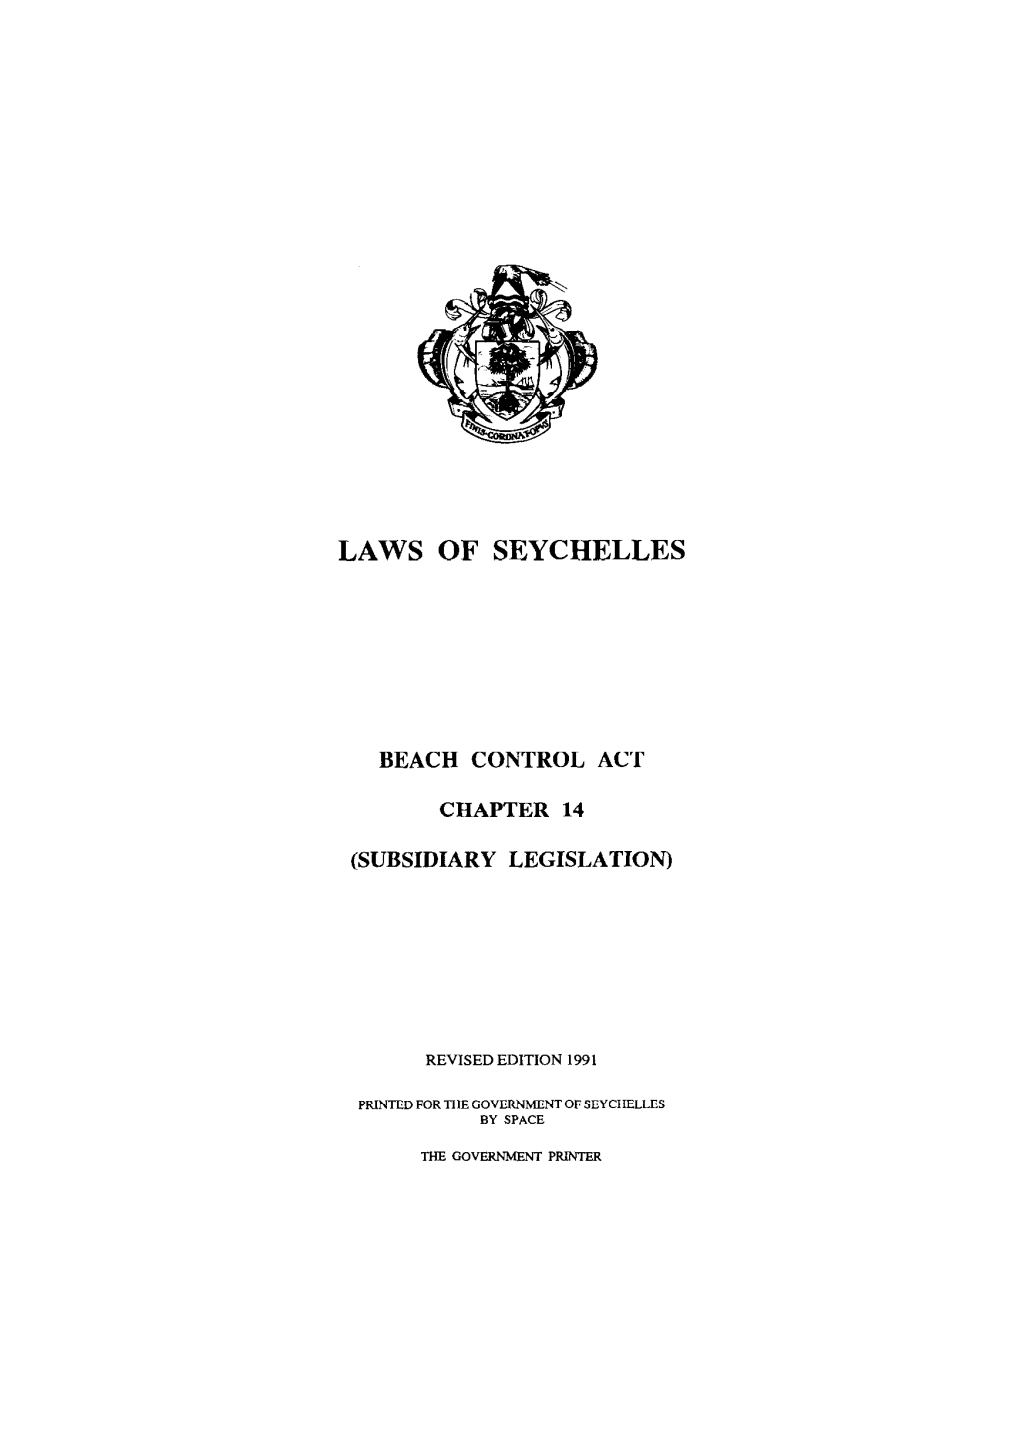 Laws of Seychelles